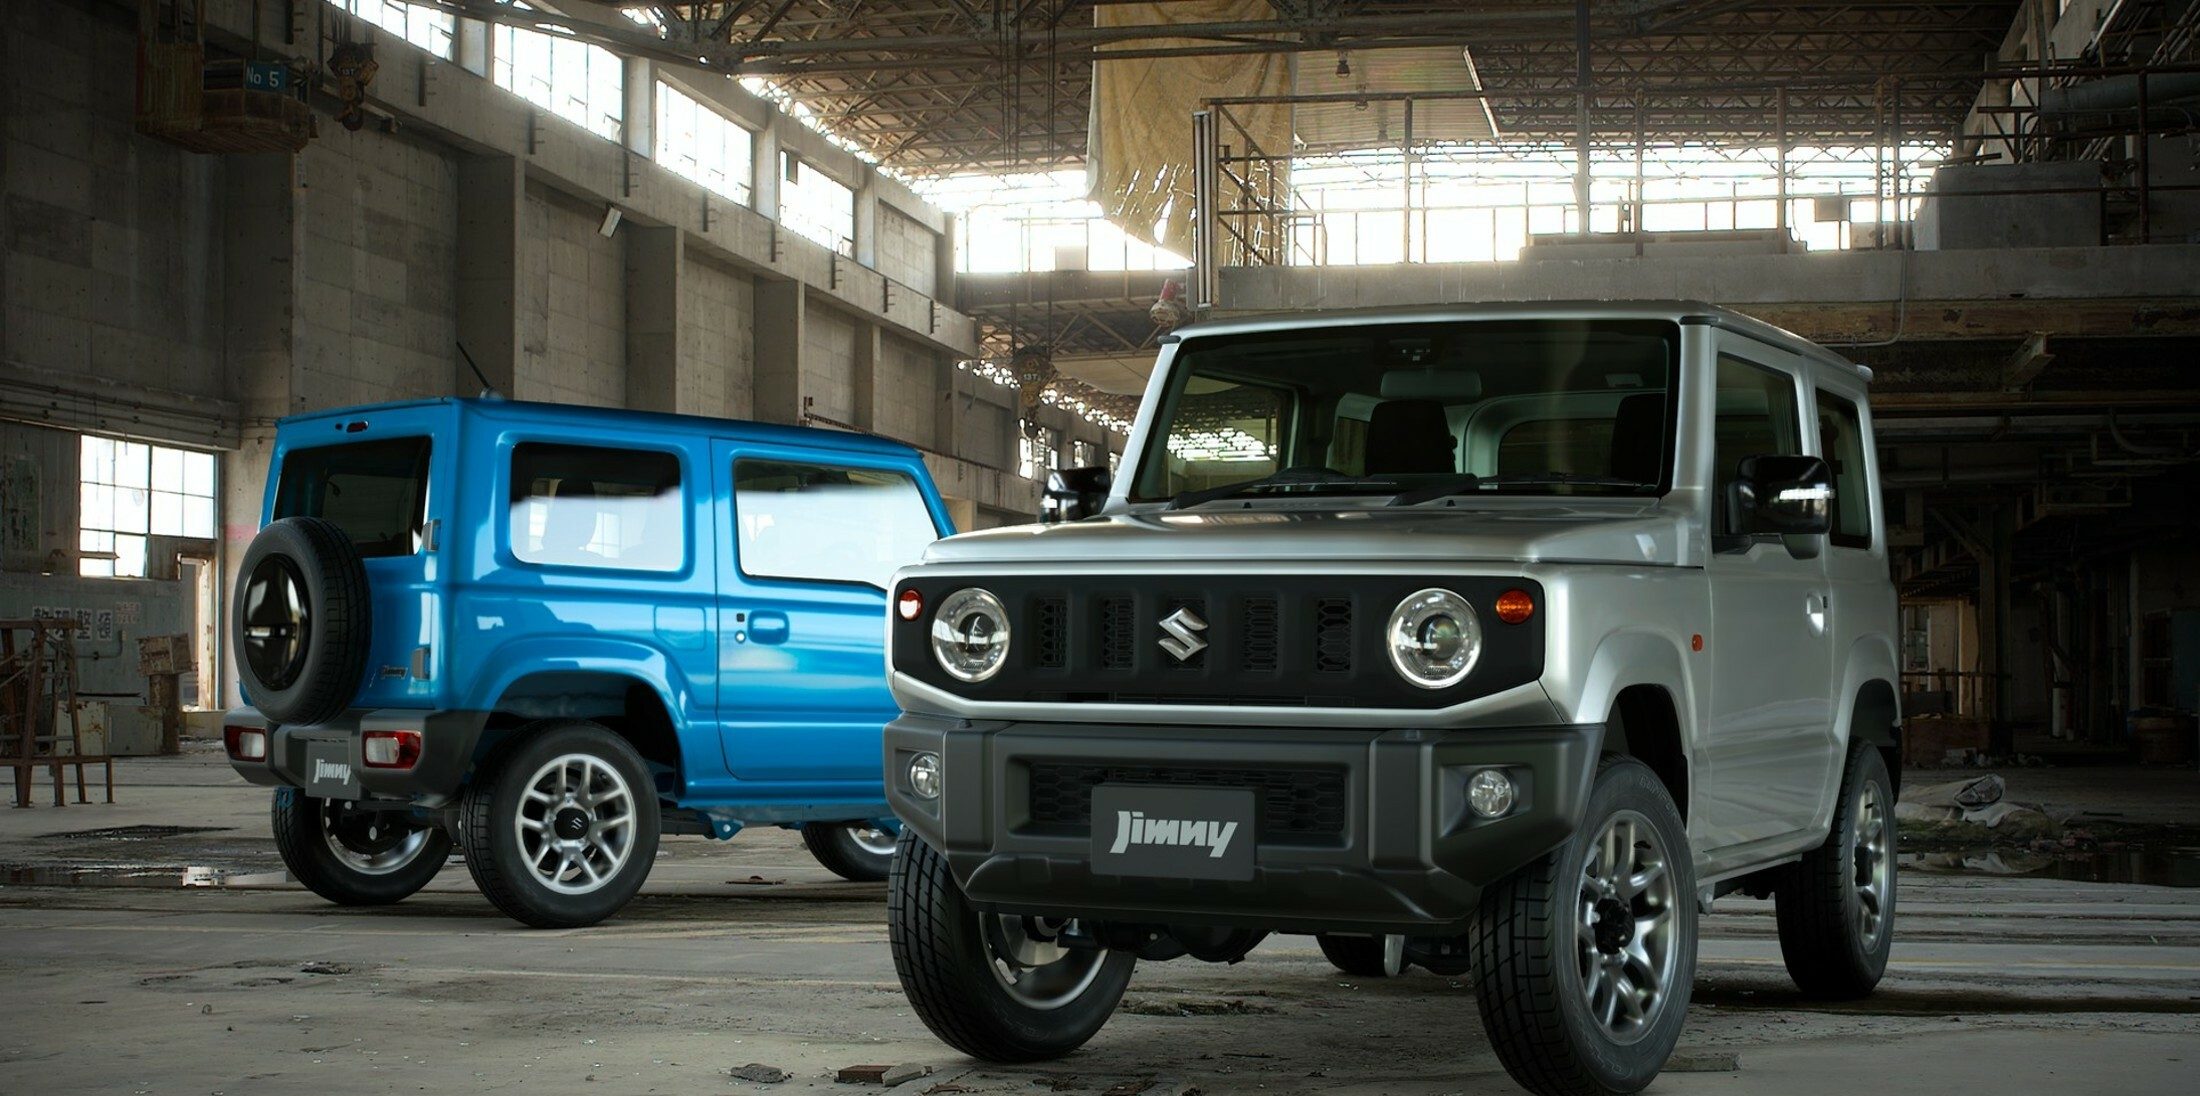 The Latest Update for Gran Turismo 7 Introduces the Suzuki Jimny